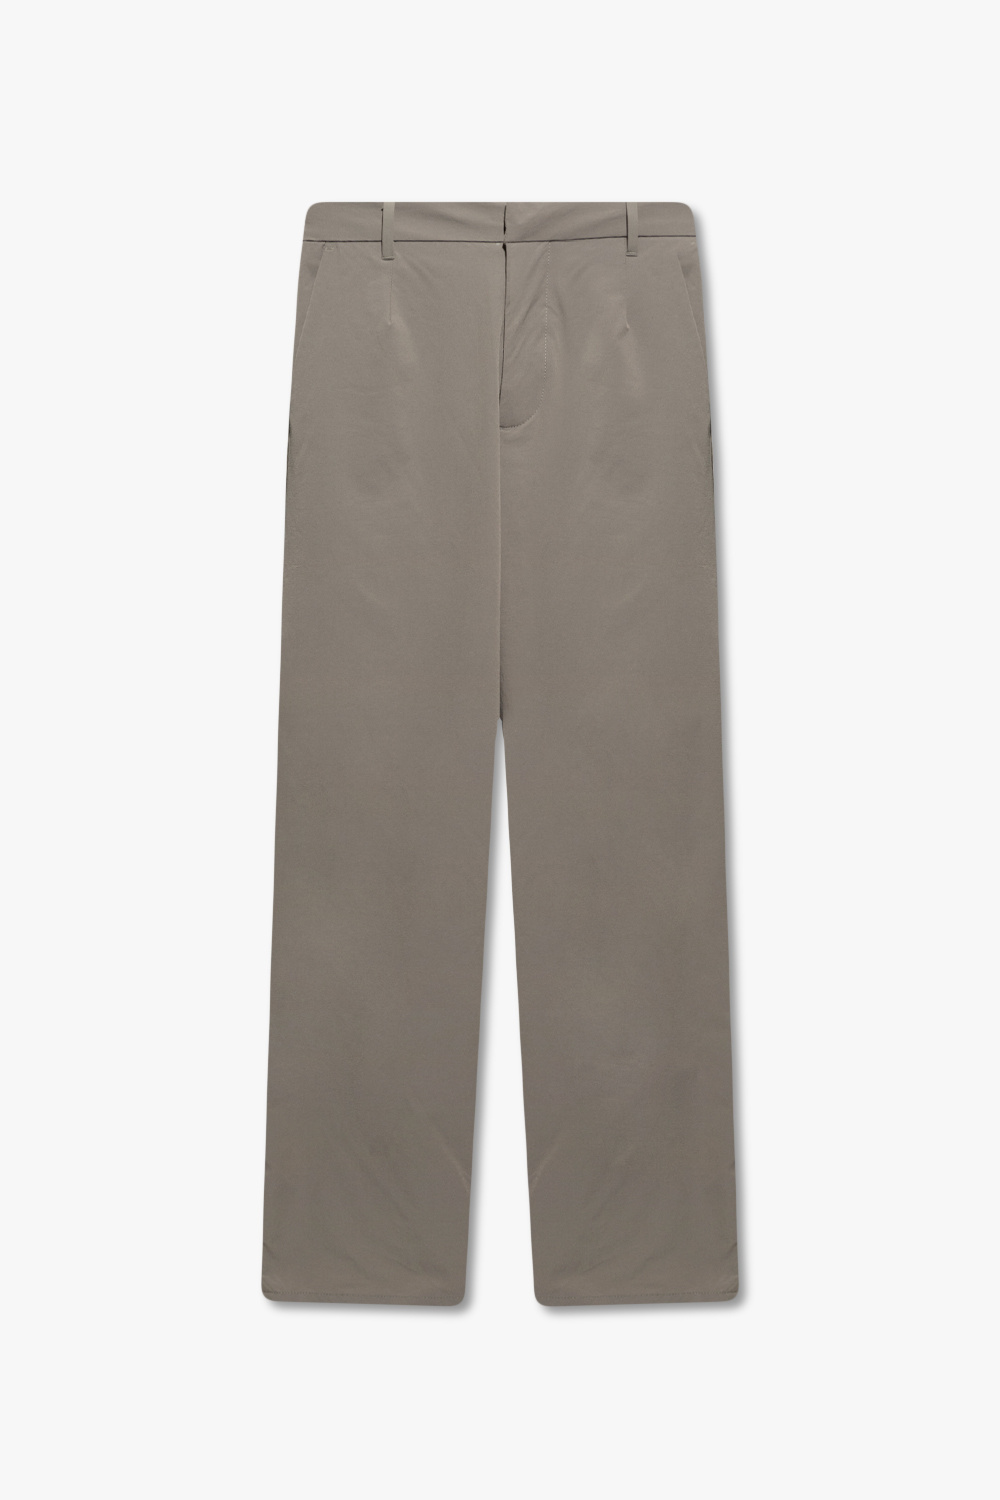 Norse Projects ‘Aaren’ trousers